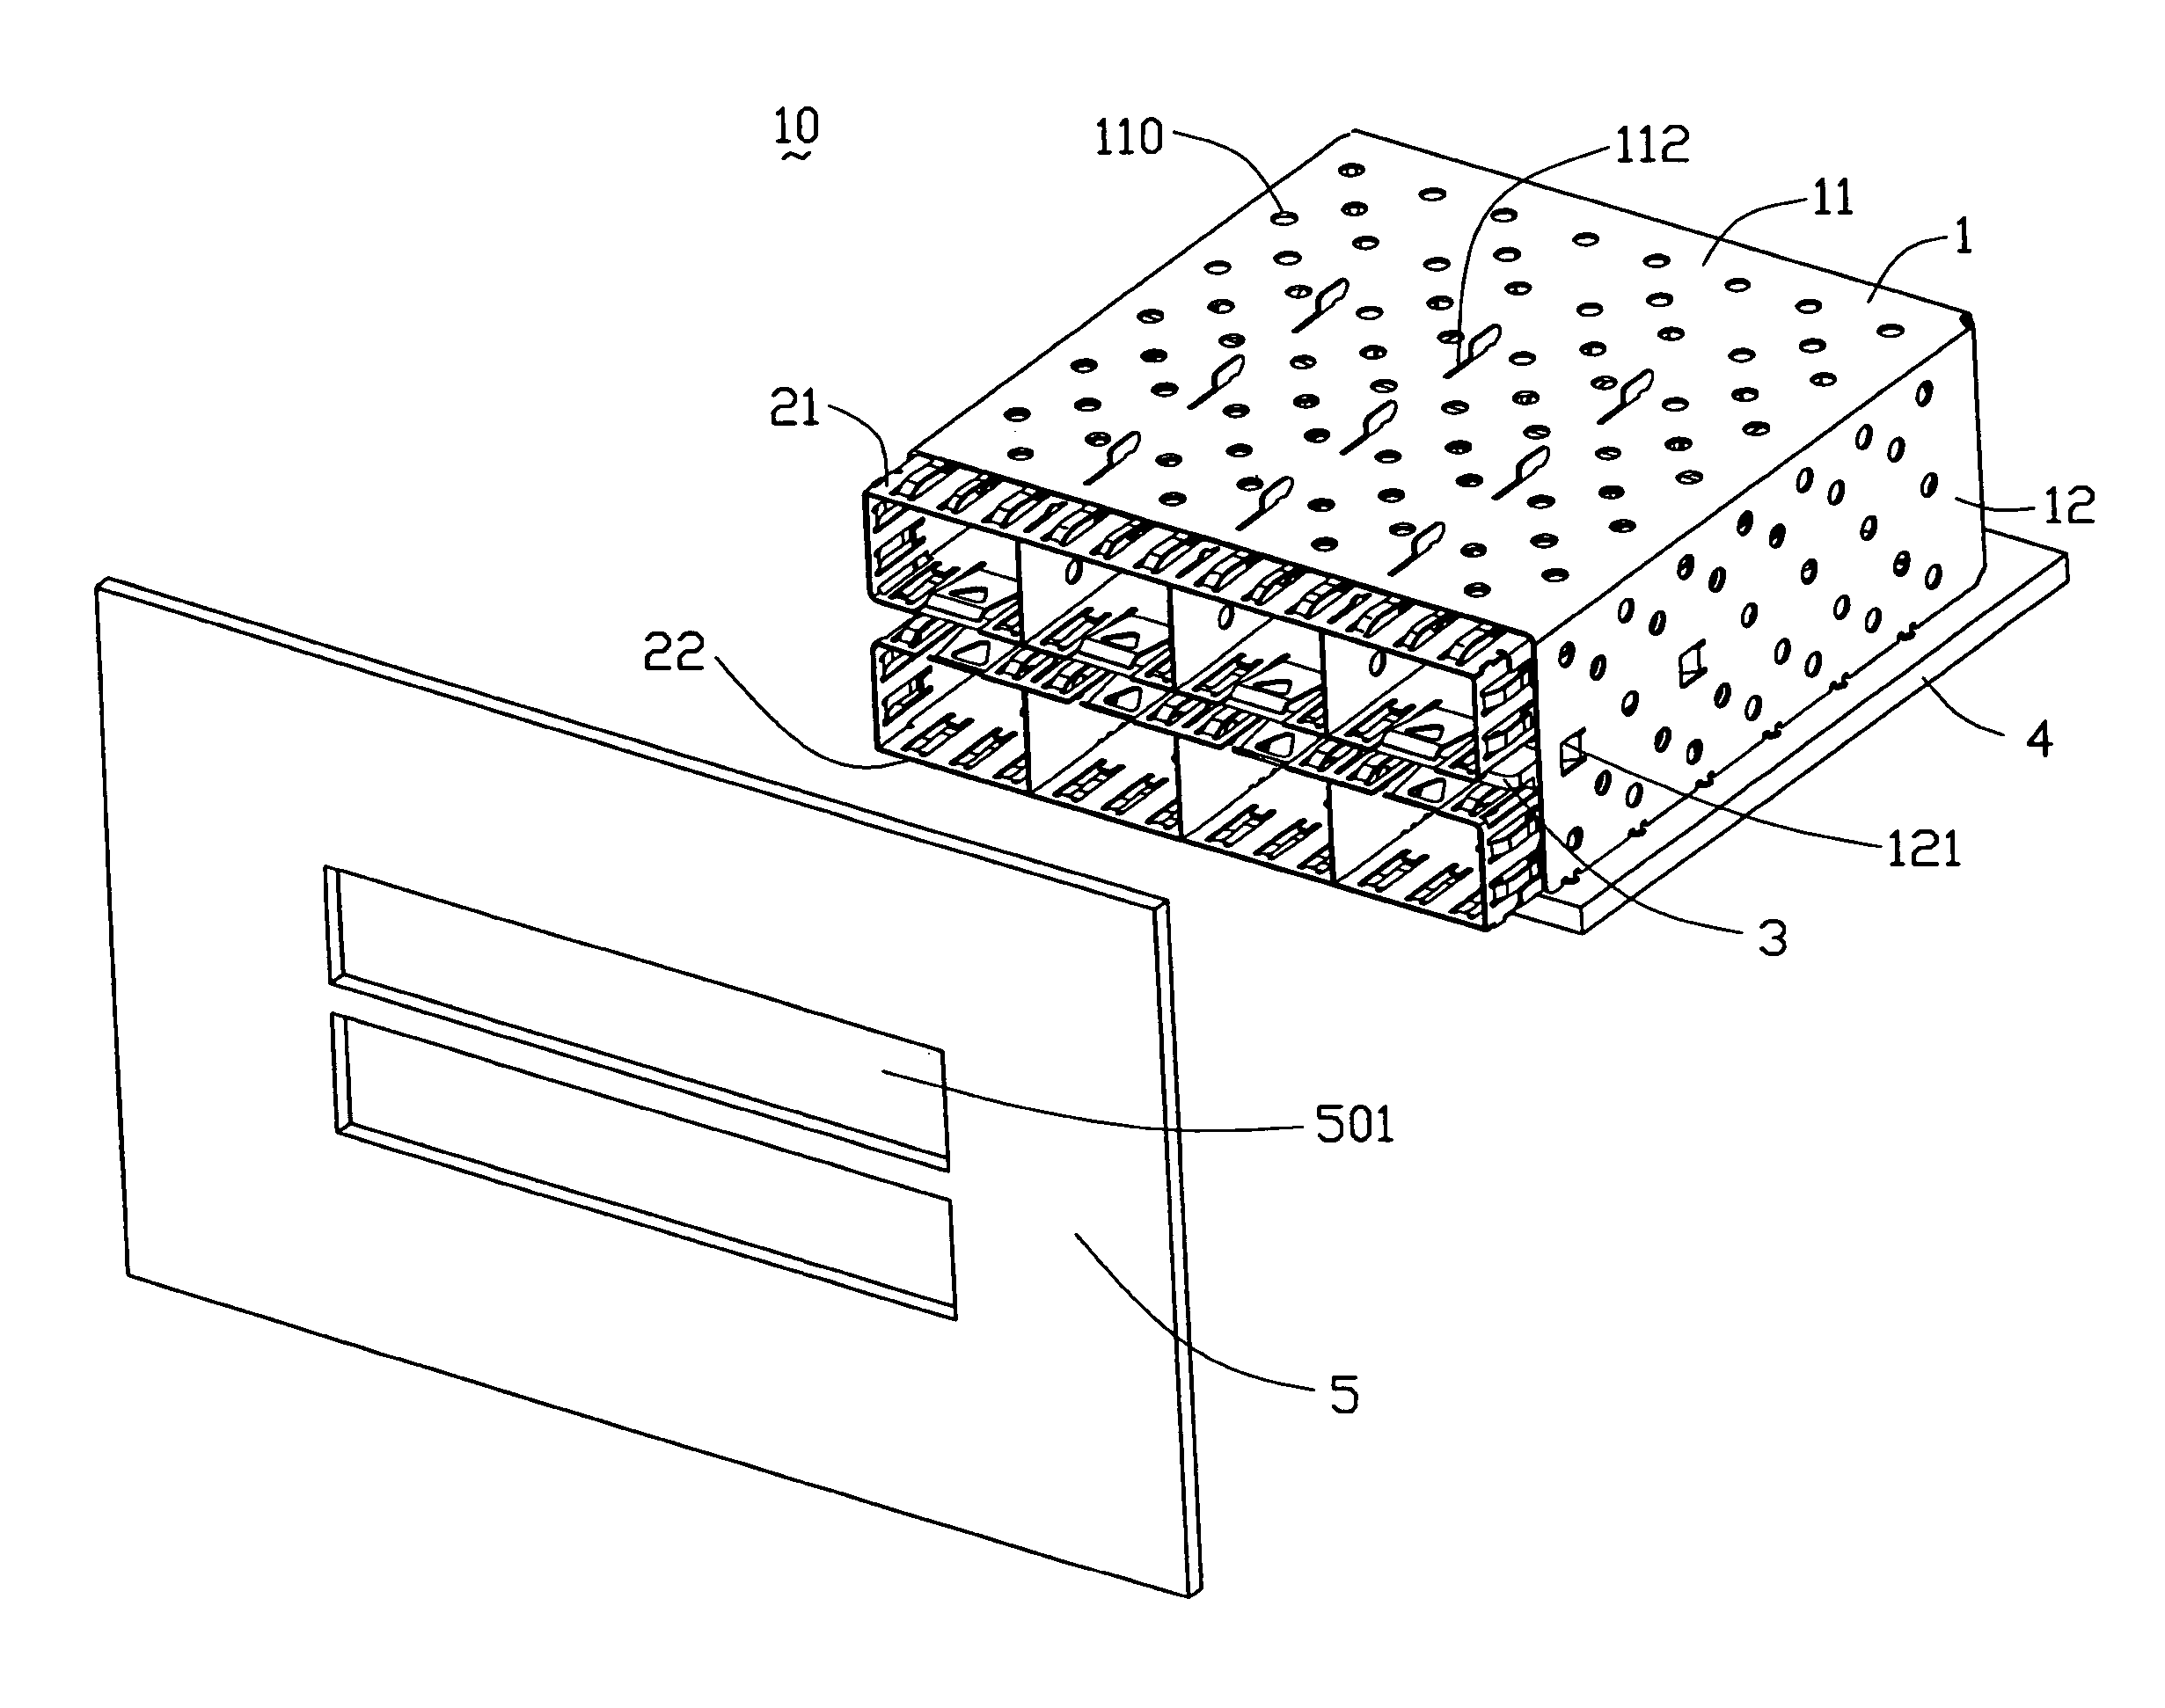 Shielding cage assembly adapted for dense transceiver modules